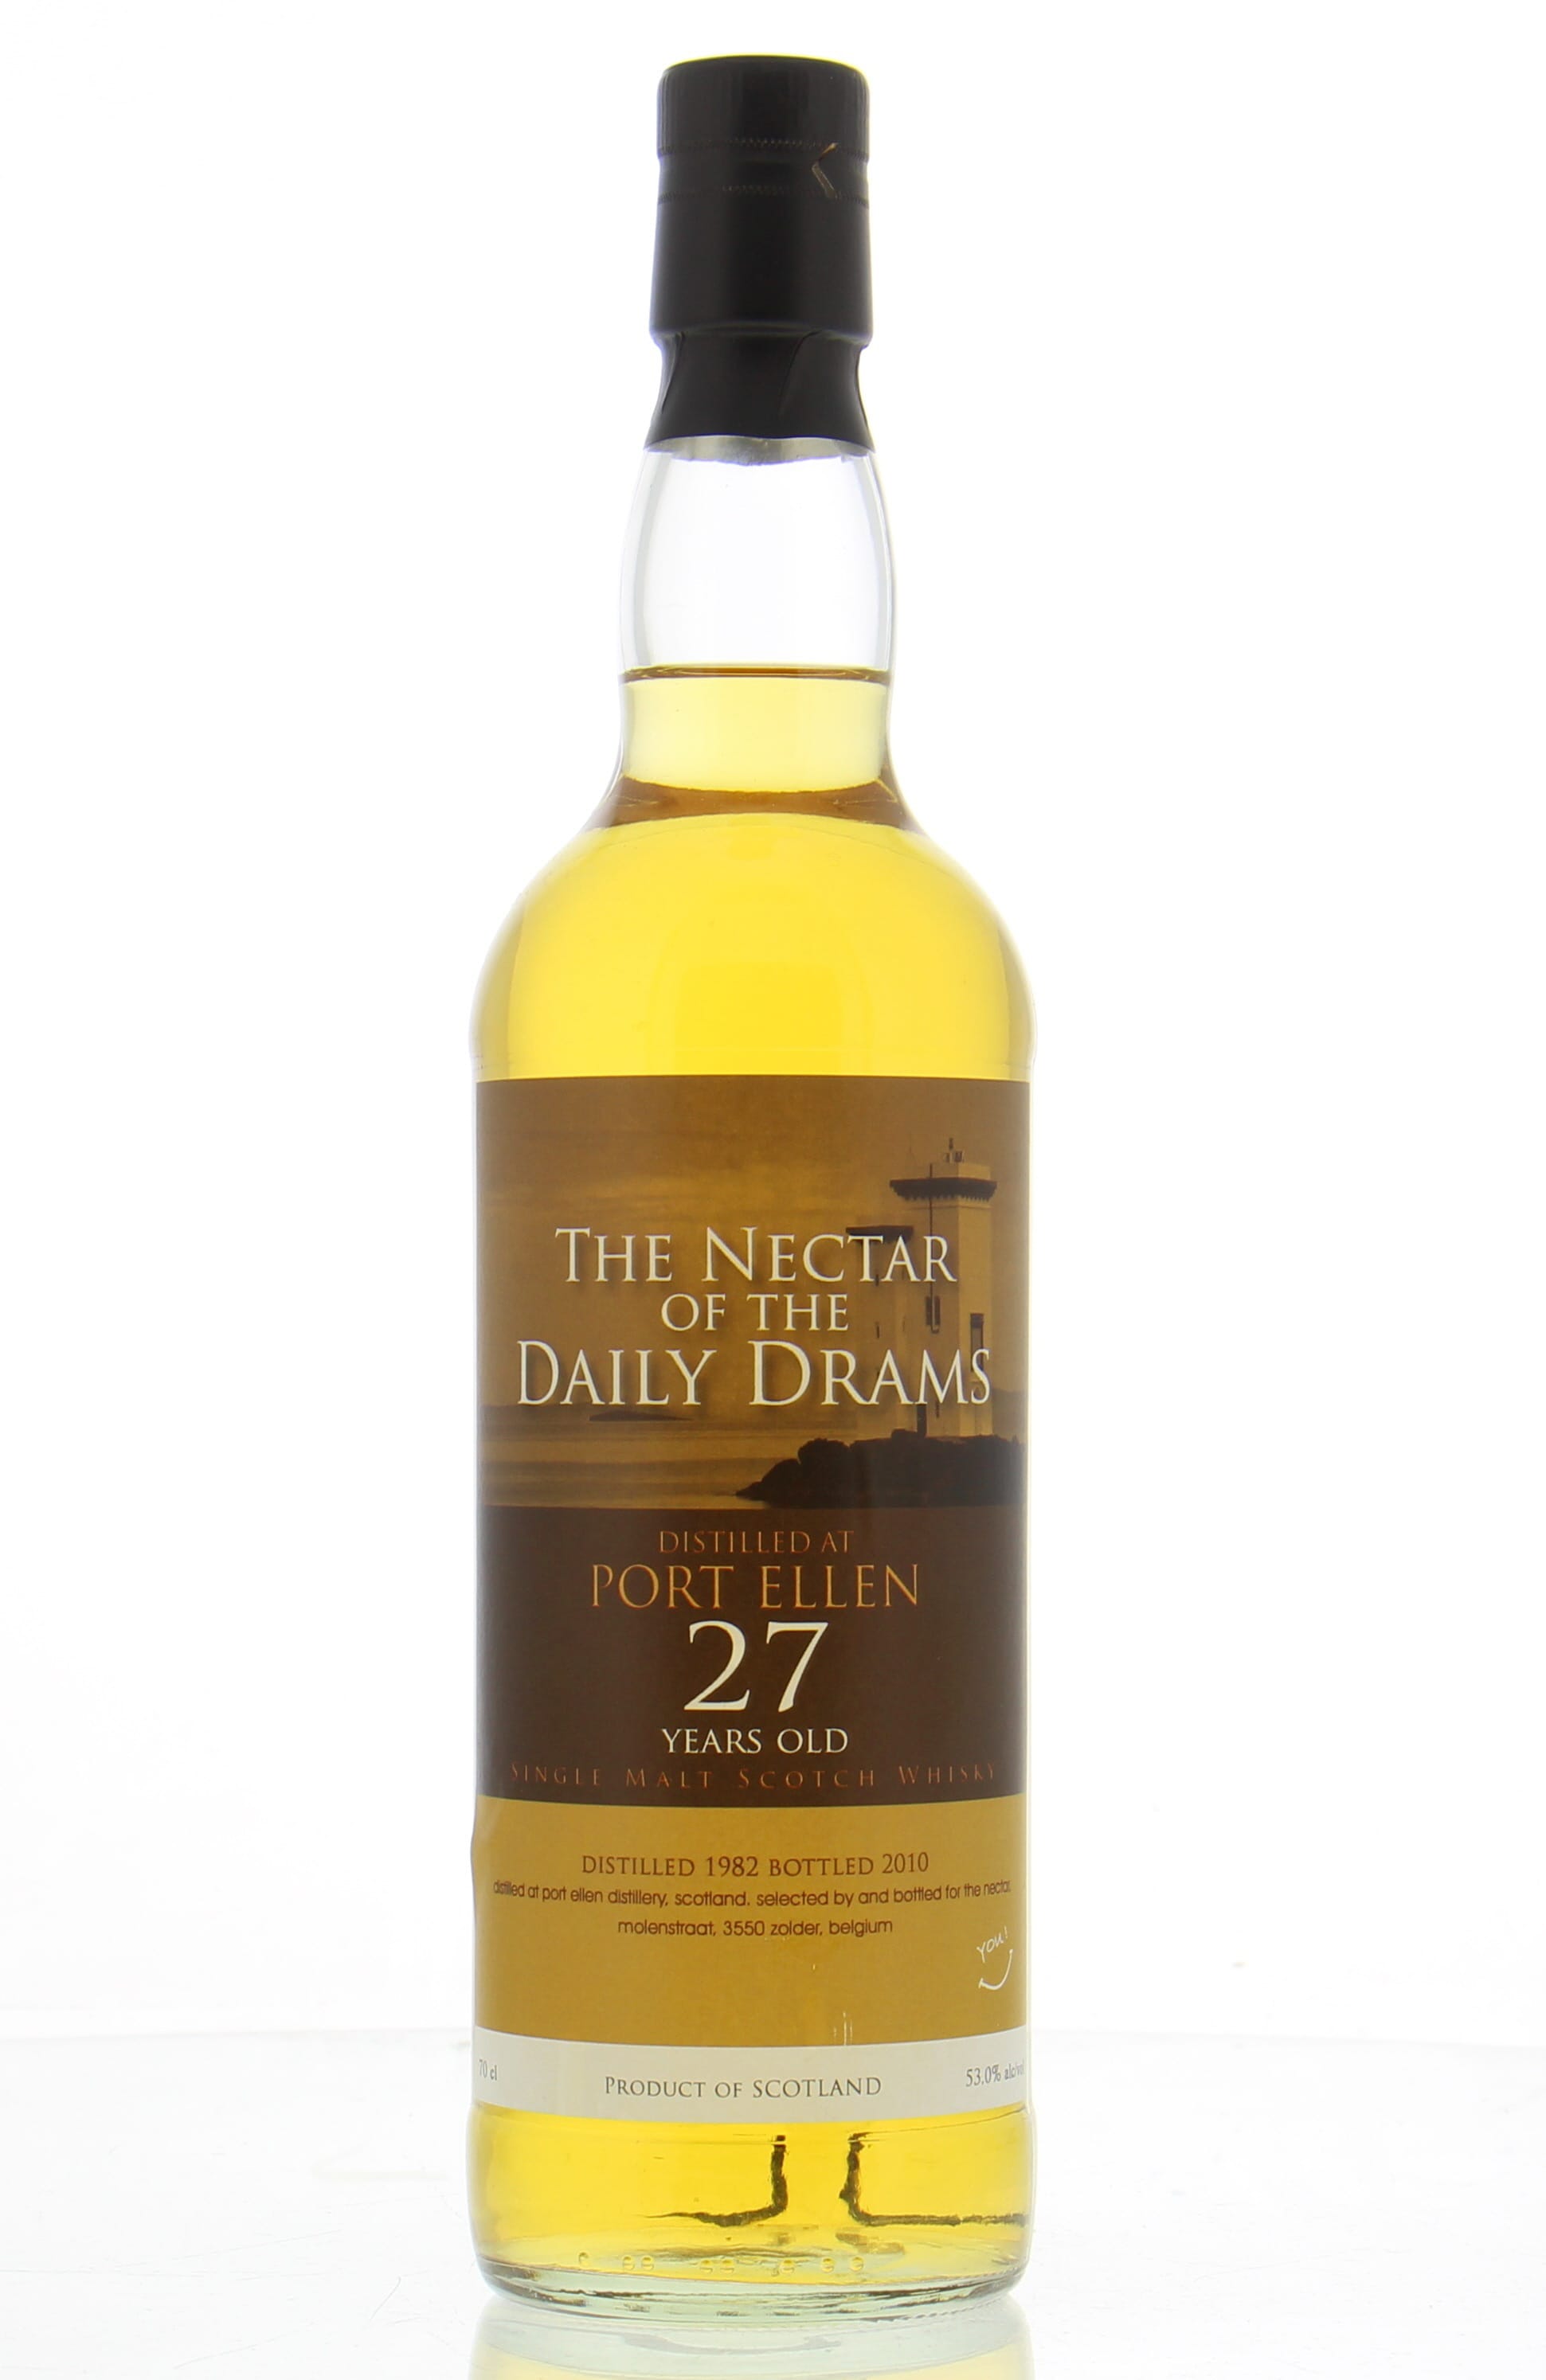 Port Ellen - 27 Years Old The Nectar of the Daily Drams 53% 1982